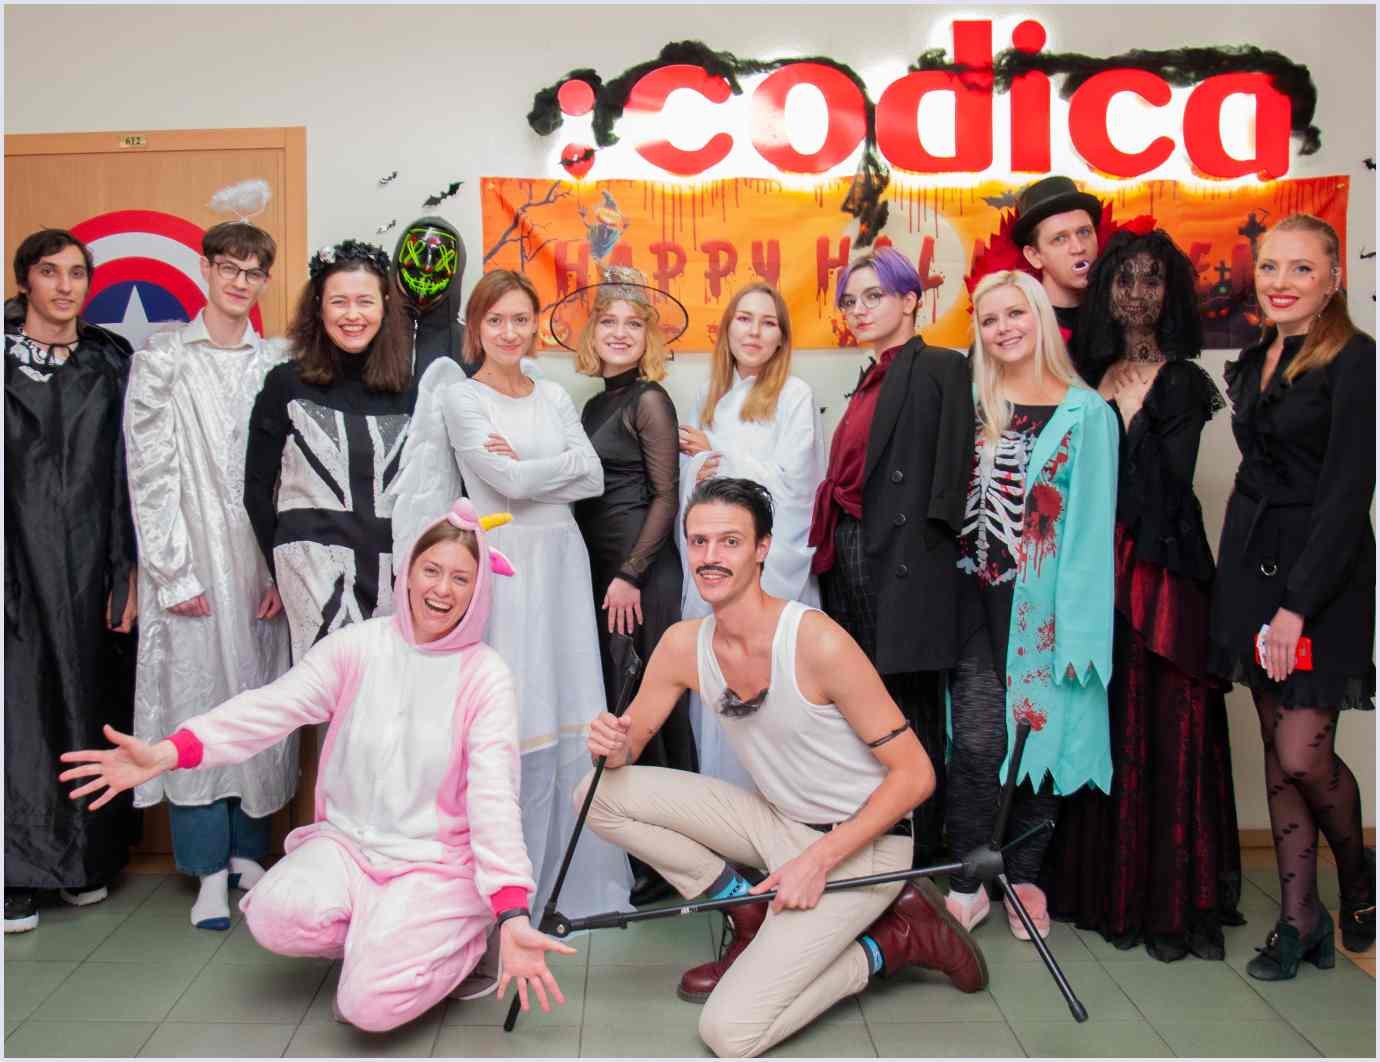 Codica team enjoyed Halloween party in 2021